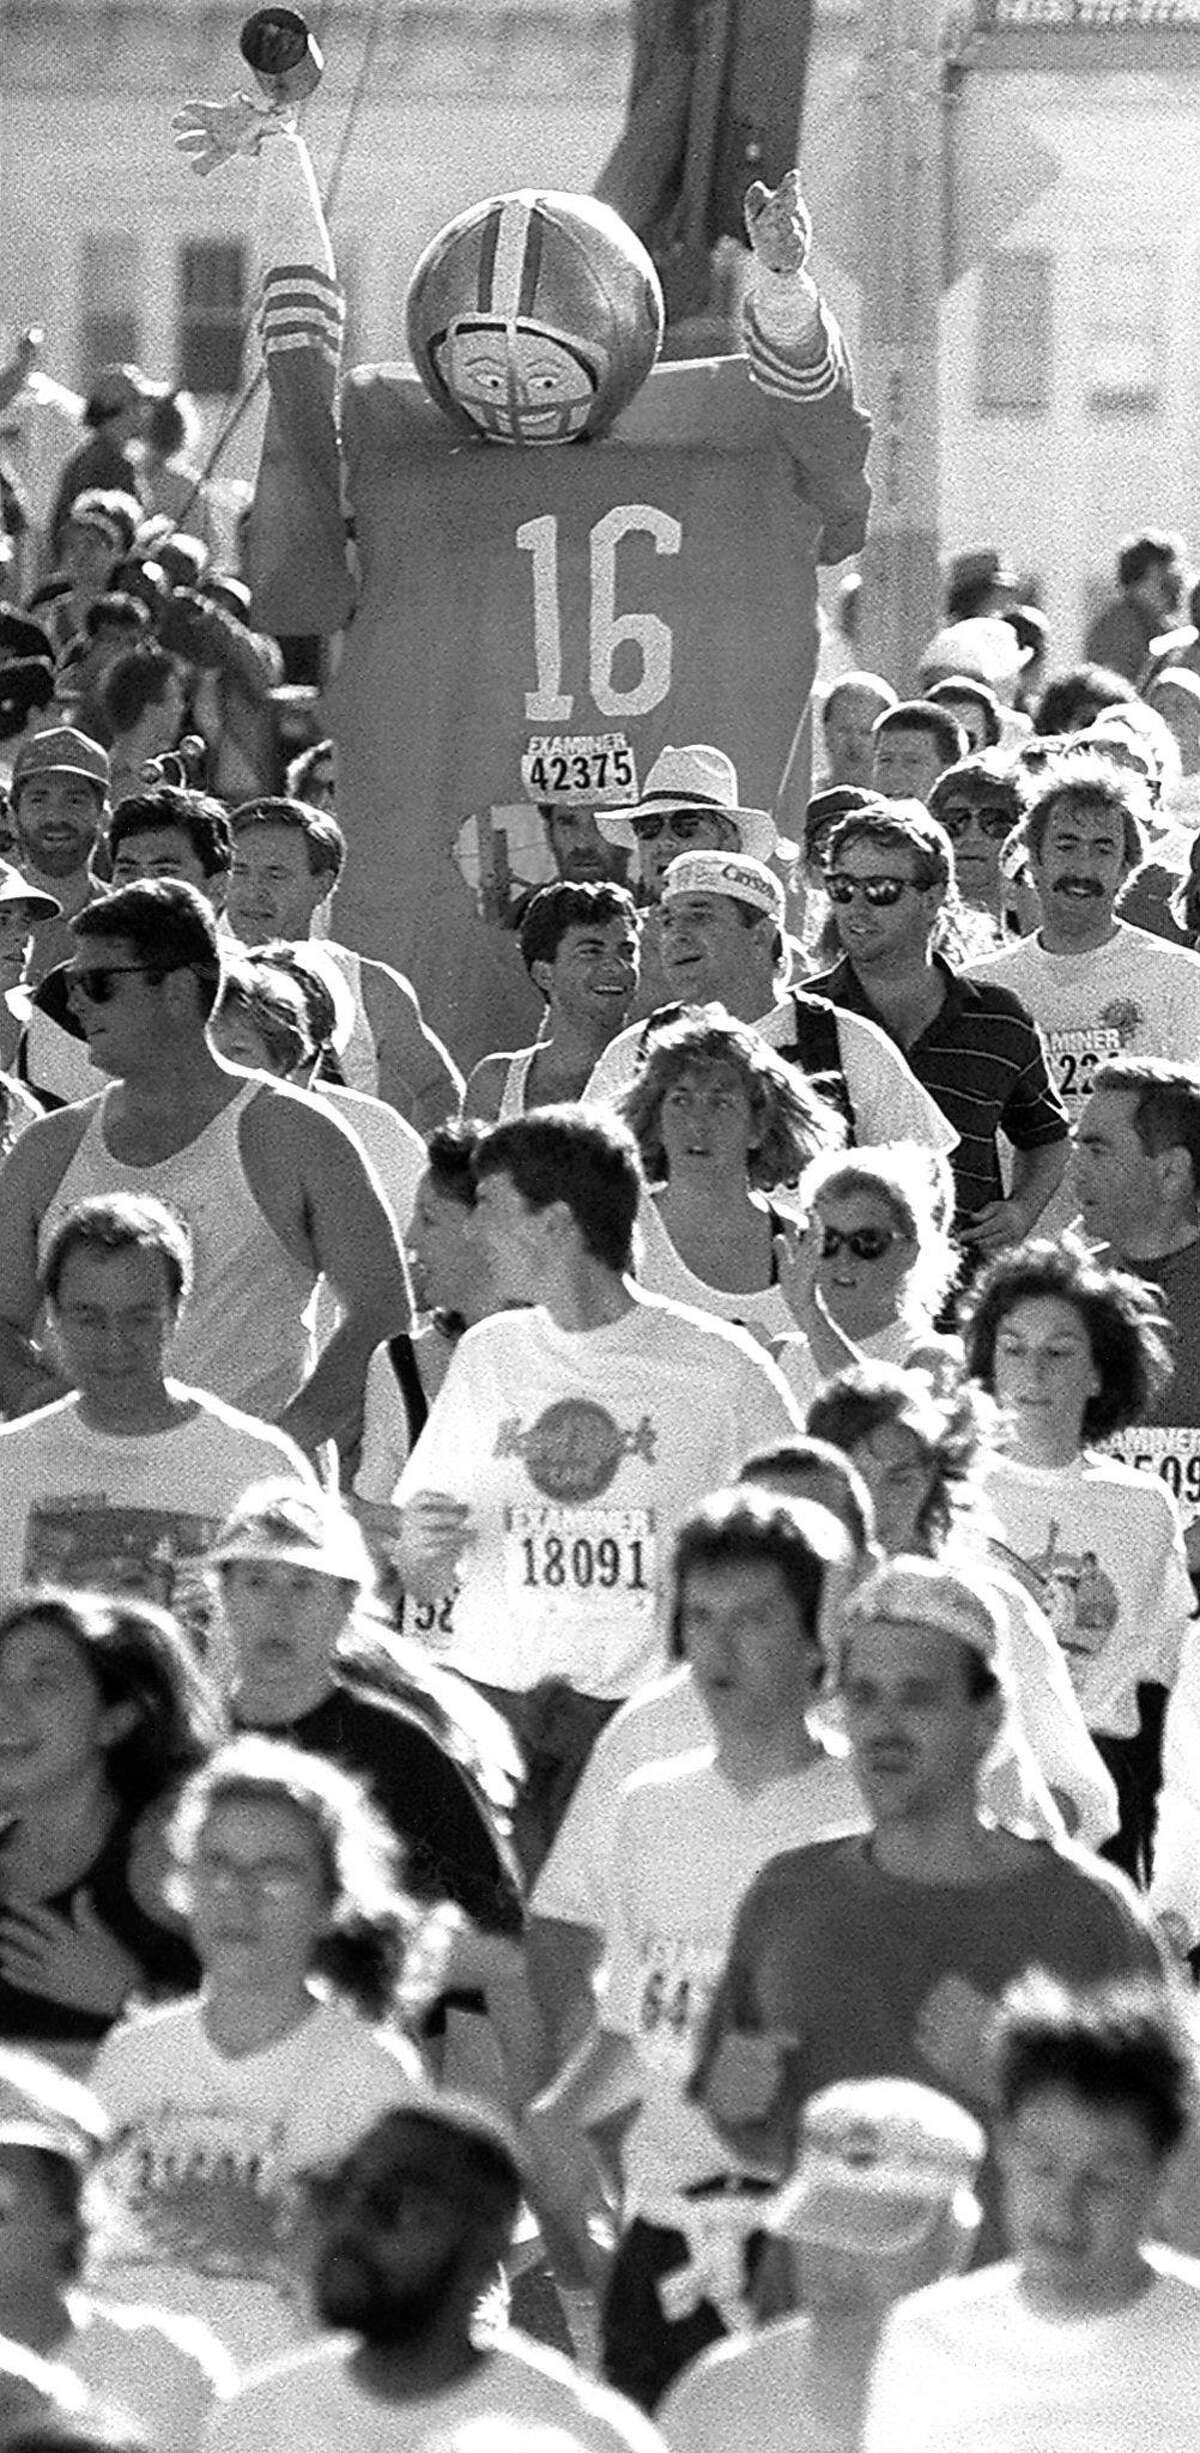 San Francisco Bay to Breakers...can't let go of Joe Montana seen running the Hayes Street hill, May 16, 1993.